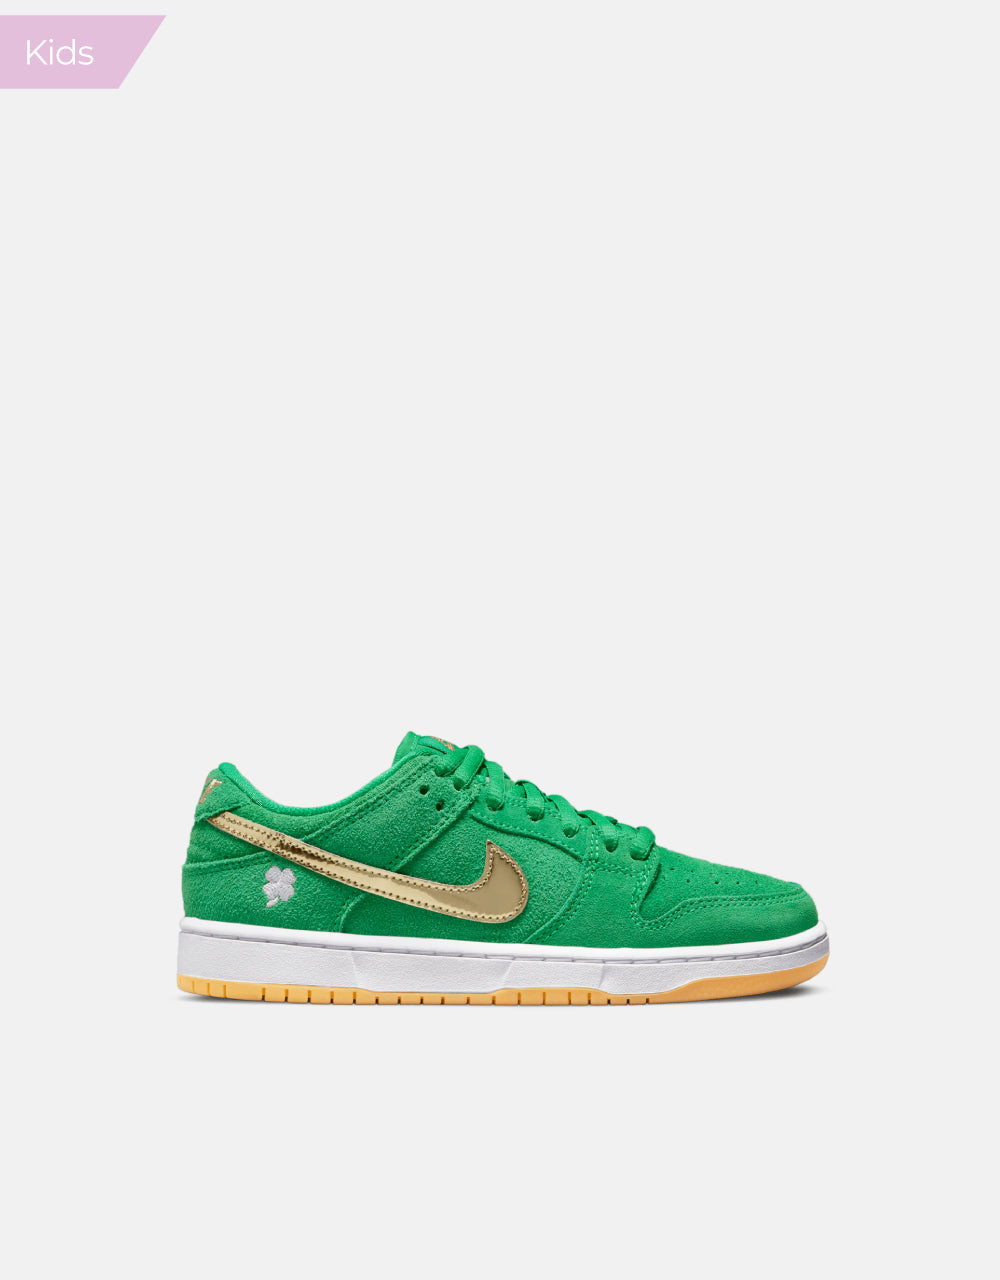 Nike SB 'Lucky' Dunk Low Pro PS Skate Shoes